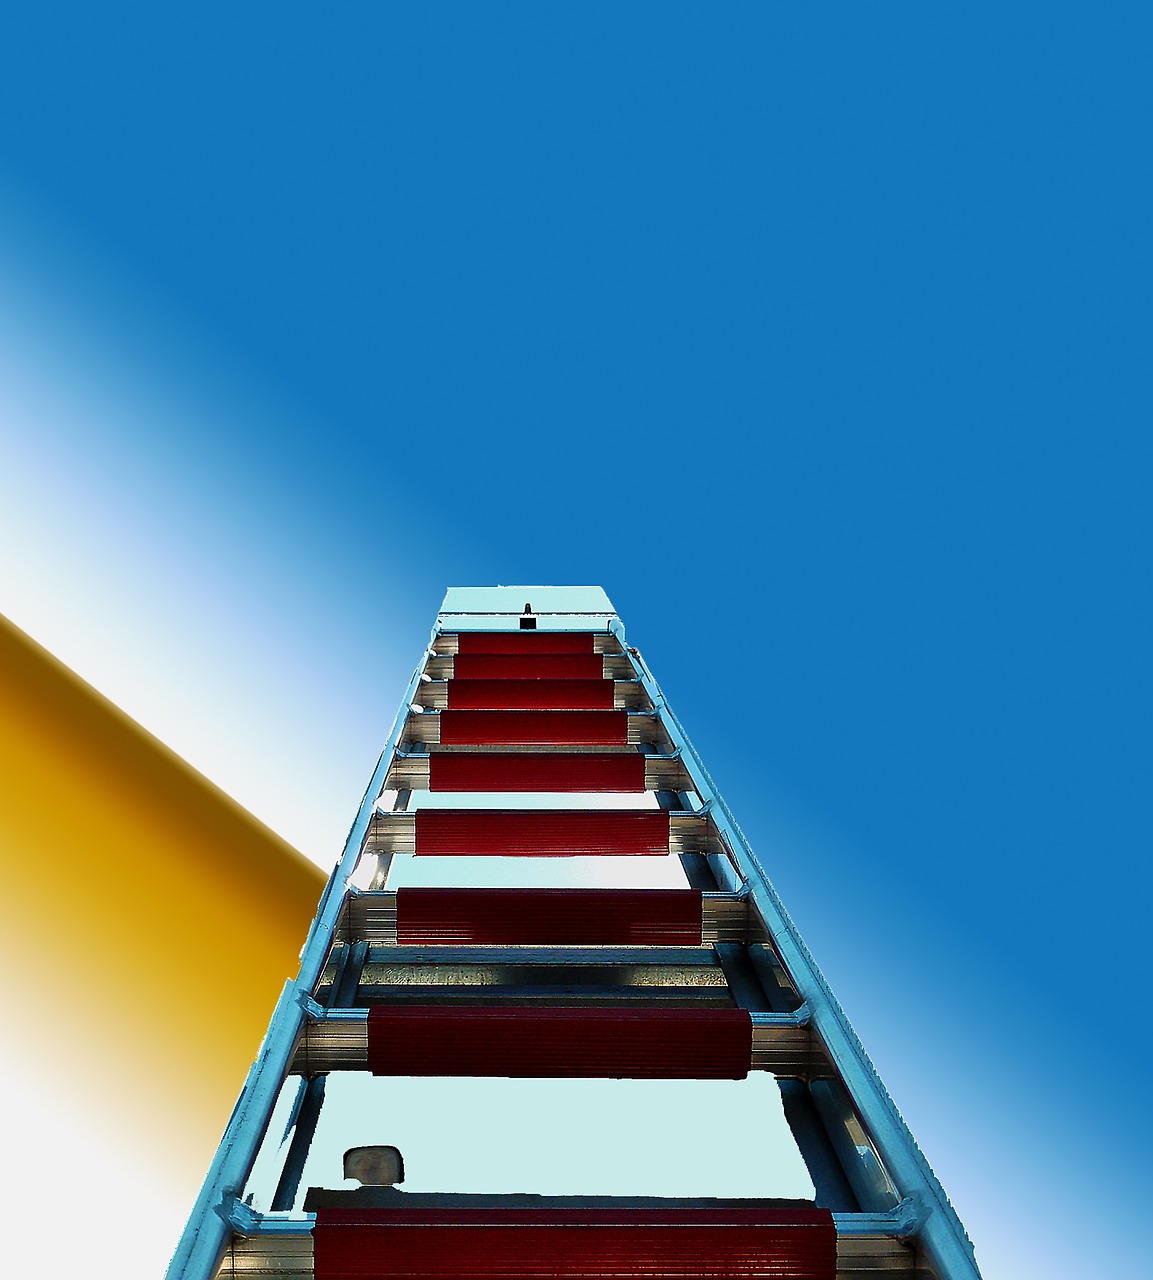 mountains turntable ladder use free photo